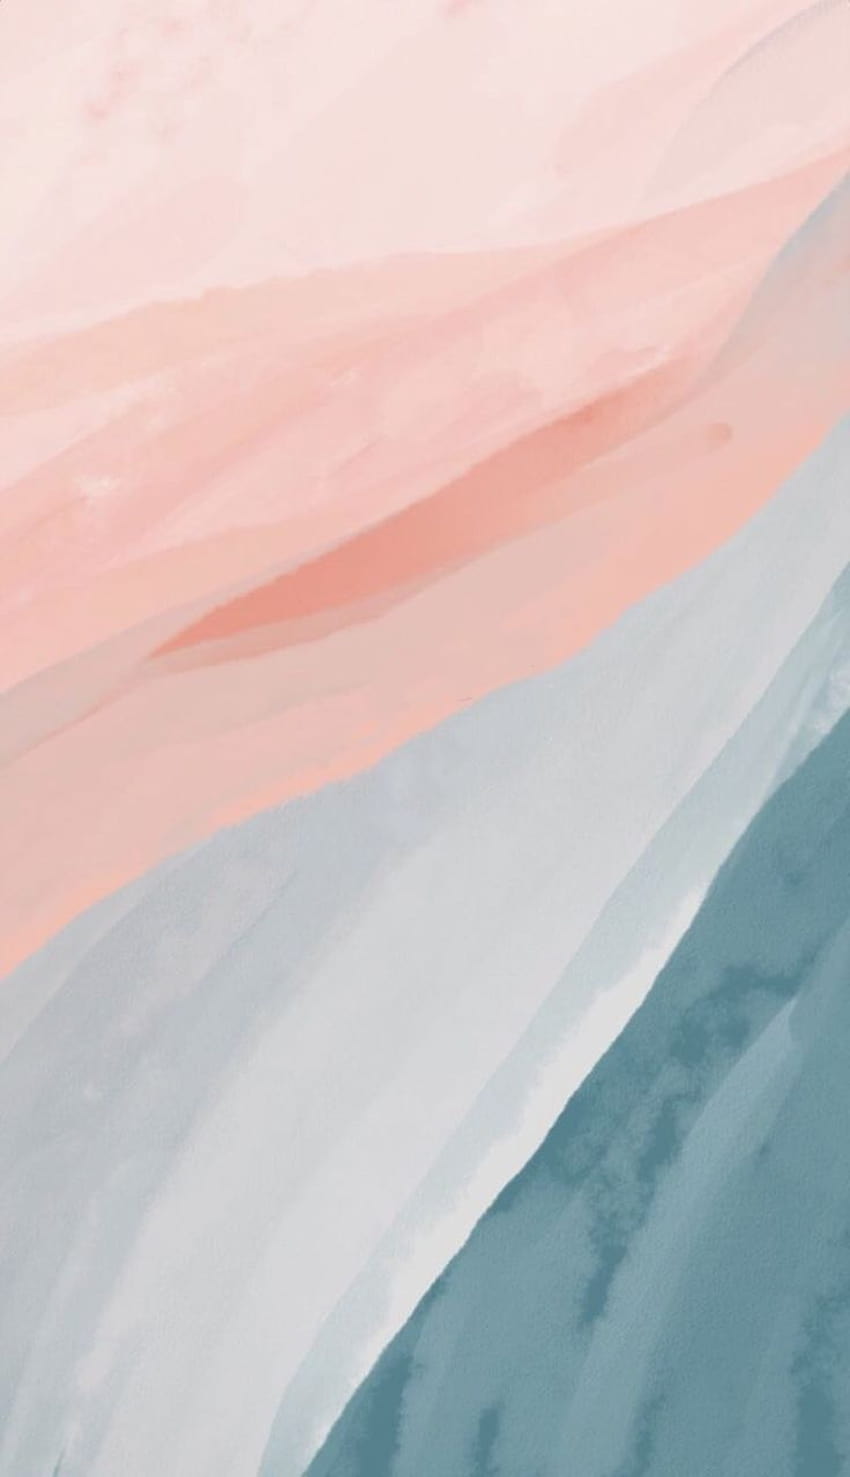 IPhone wallpaper of a watercolor painting of pink and blue mountains - Clean